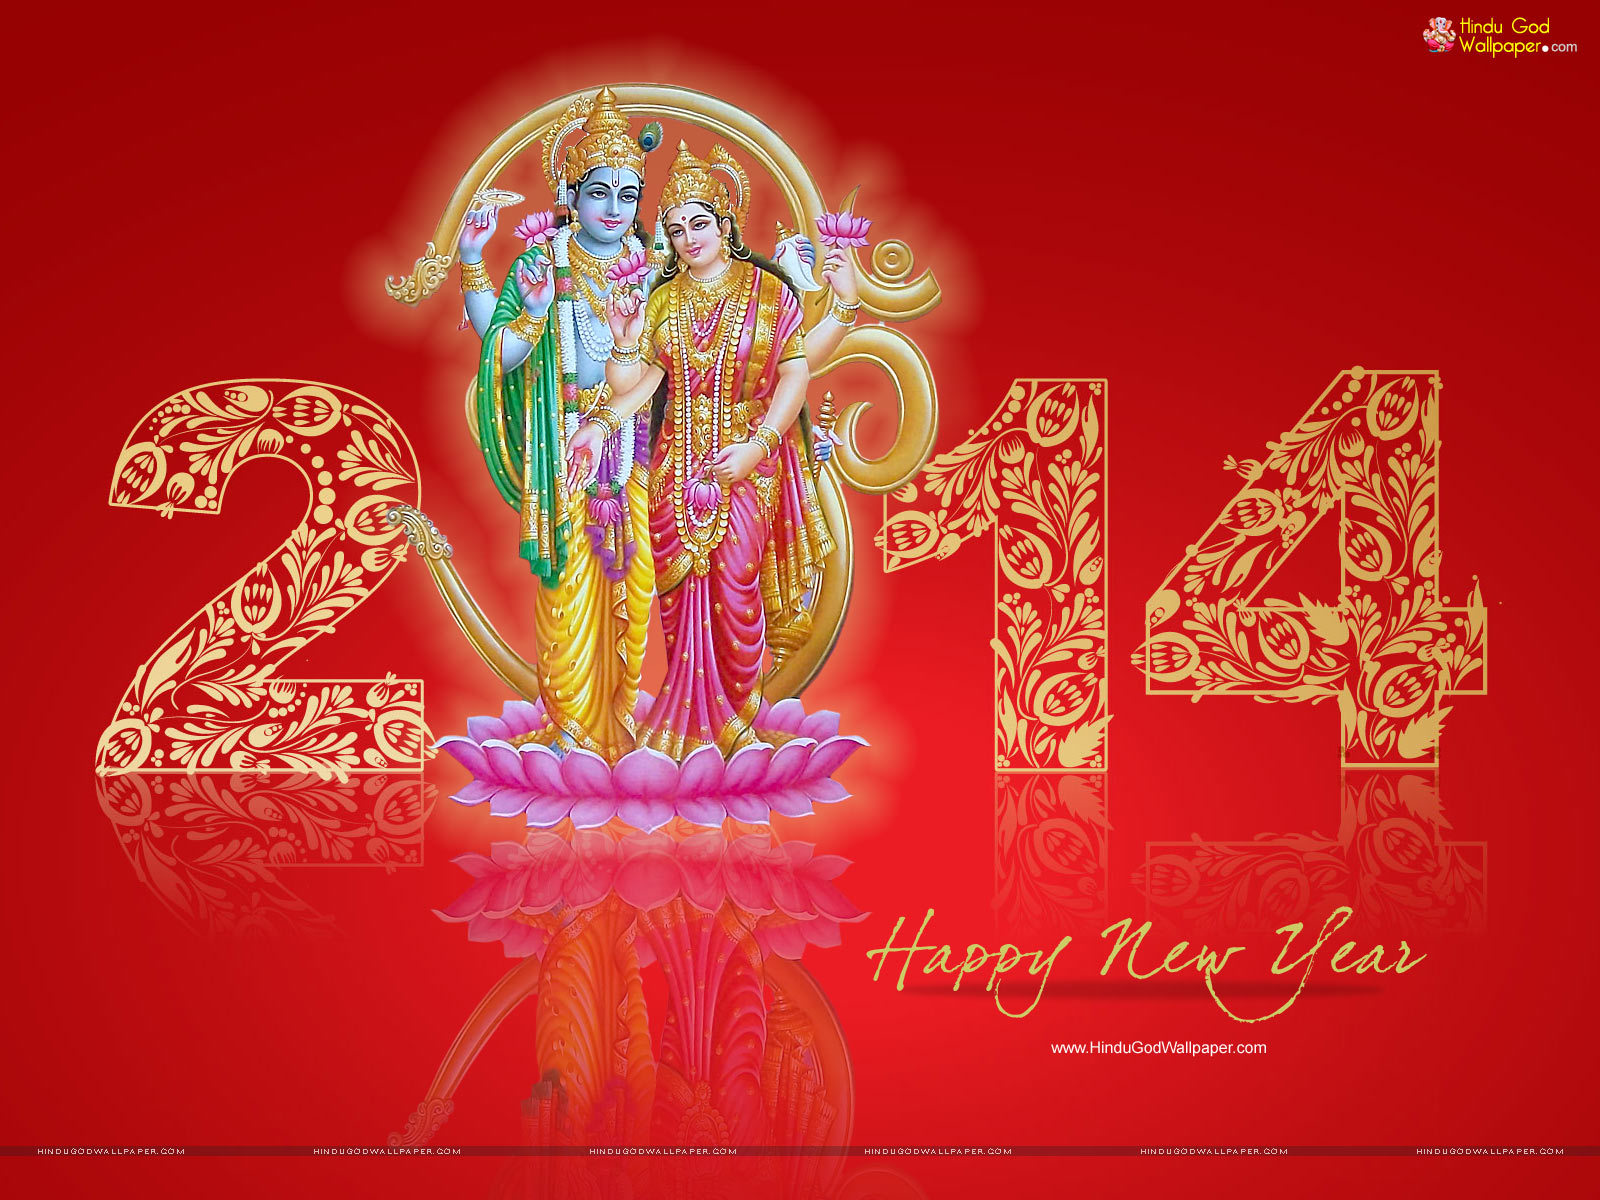 New Year wallpapers Happy new year from India 051636 jpg